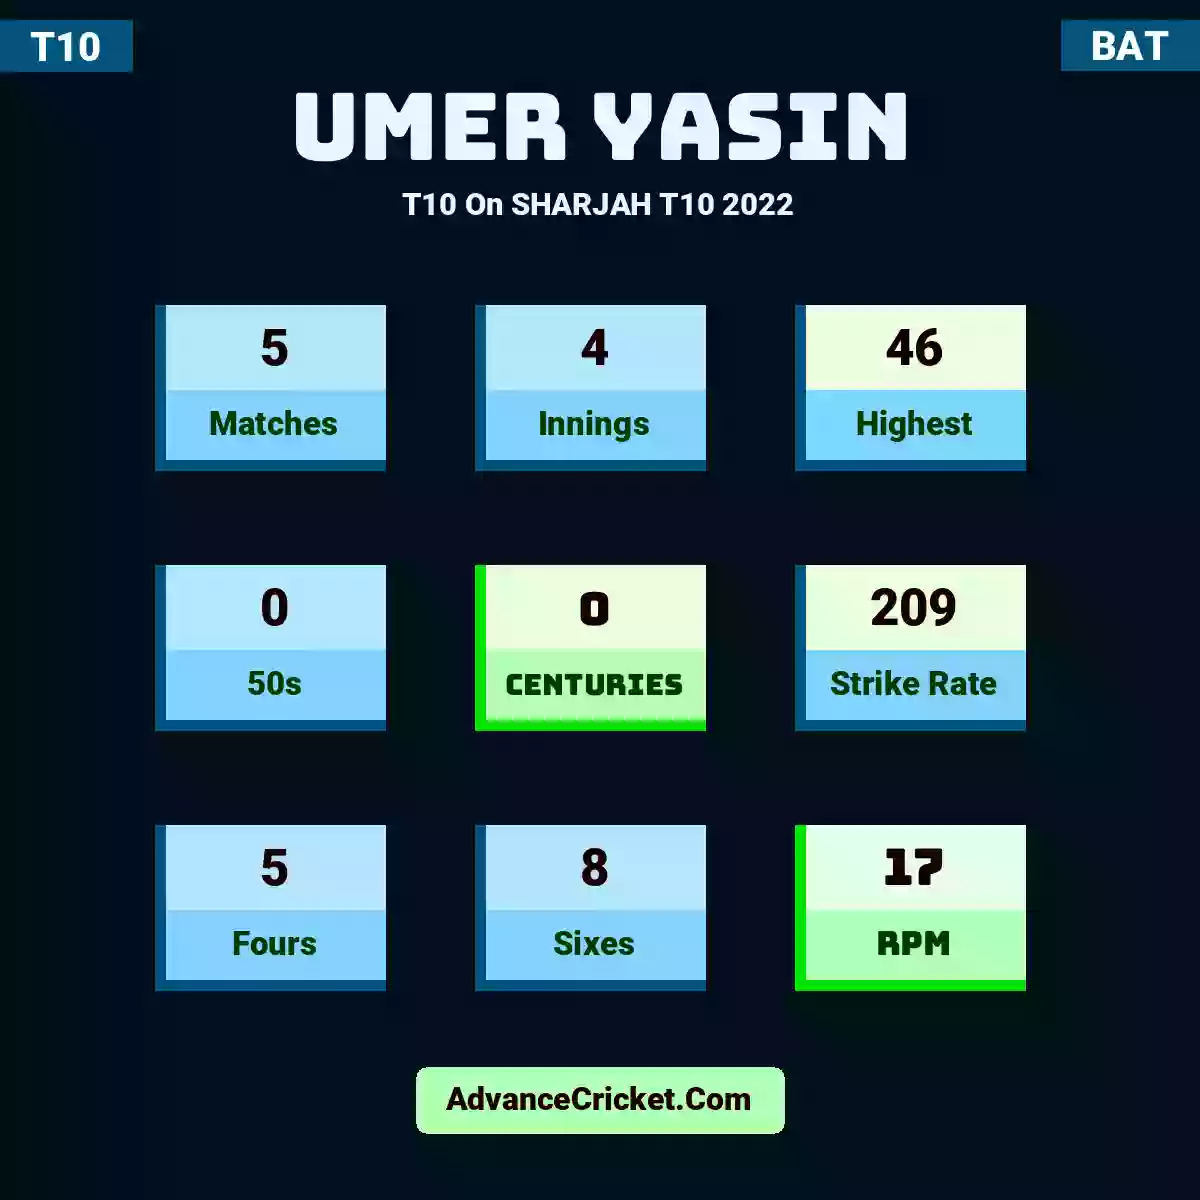 Umer Yasin T10  On SHARJAH T10 2022, Umer Yasin played 5 matches, scored 46 runs as highest, 0 half-centuries, and 0 centuries, with a strike rate of 209. U.Yasin hit 5 fours and 8 sixes, with an RPM of 17.